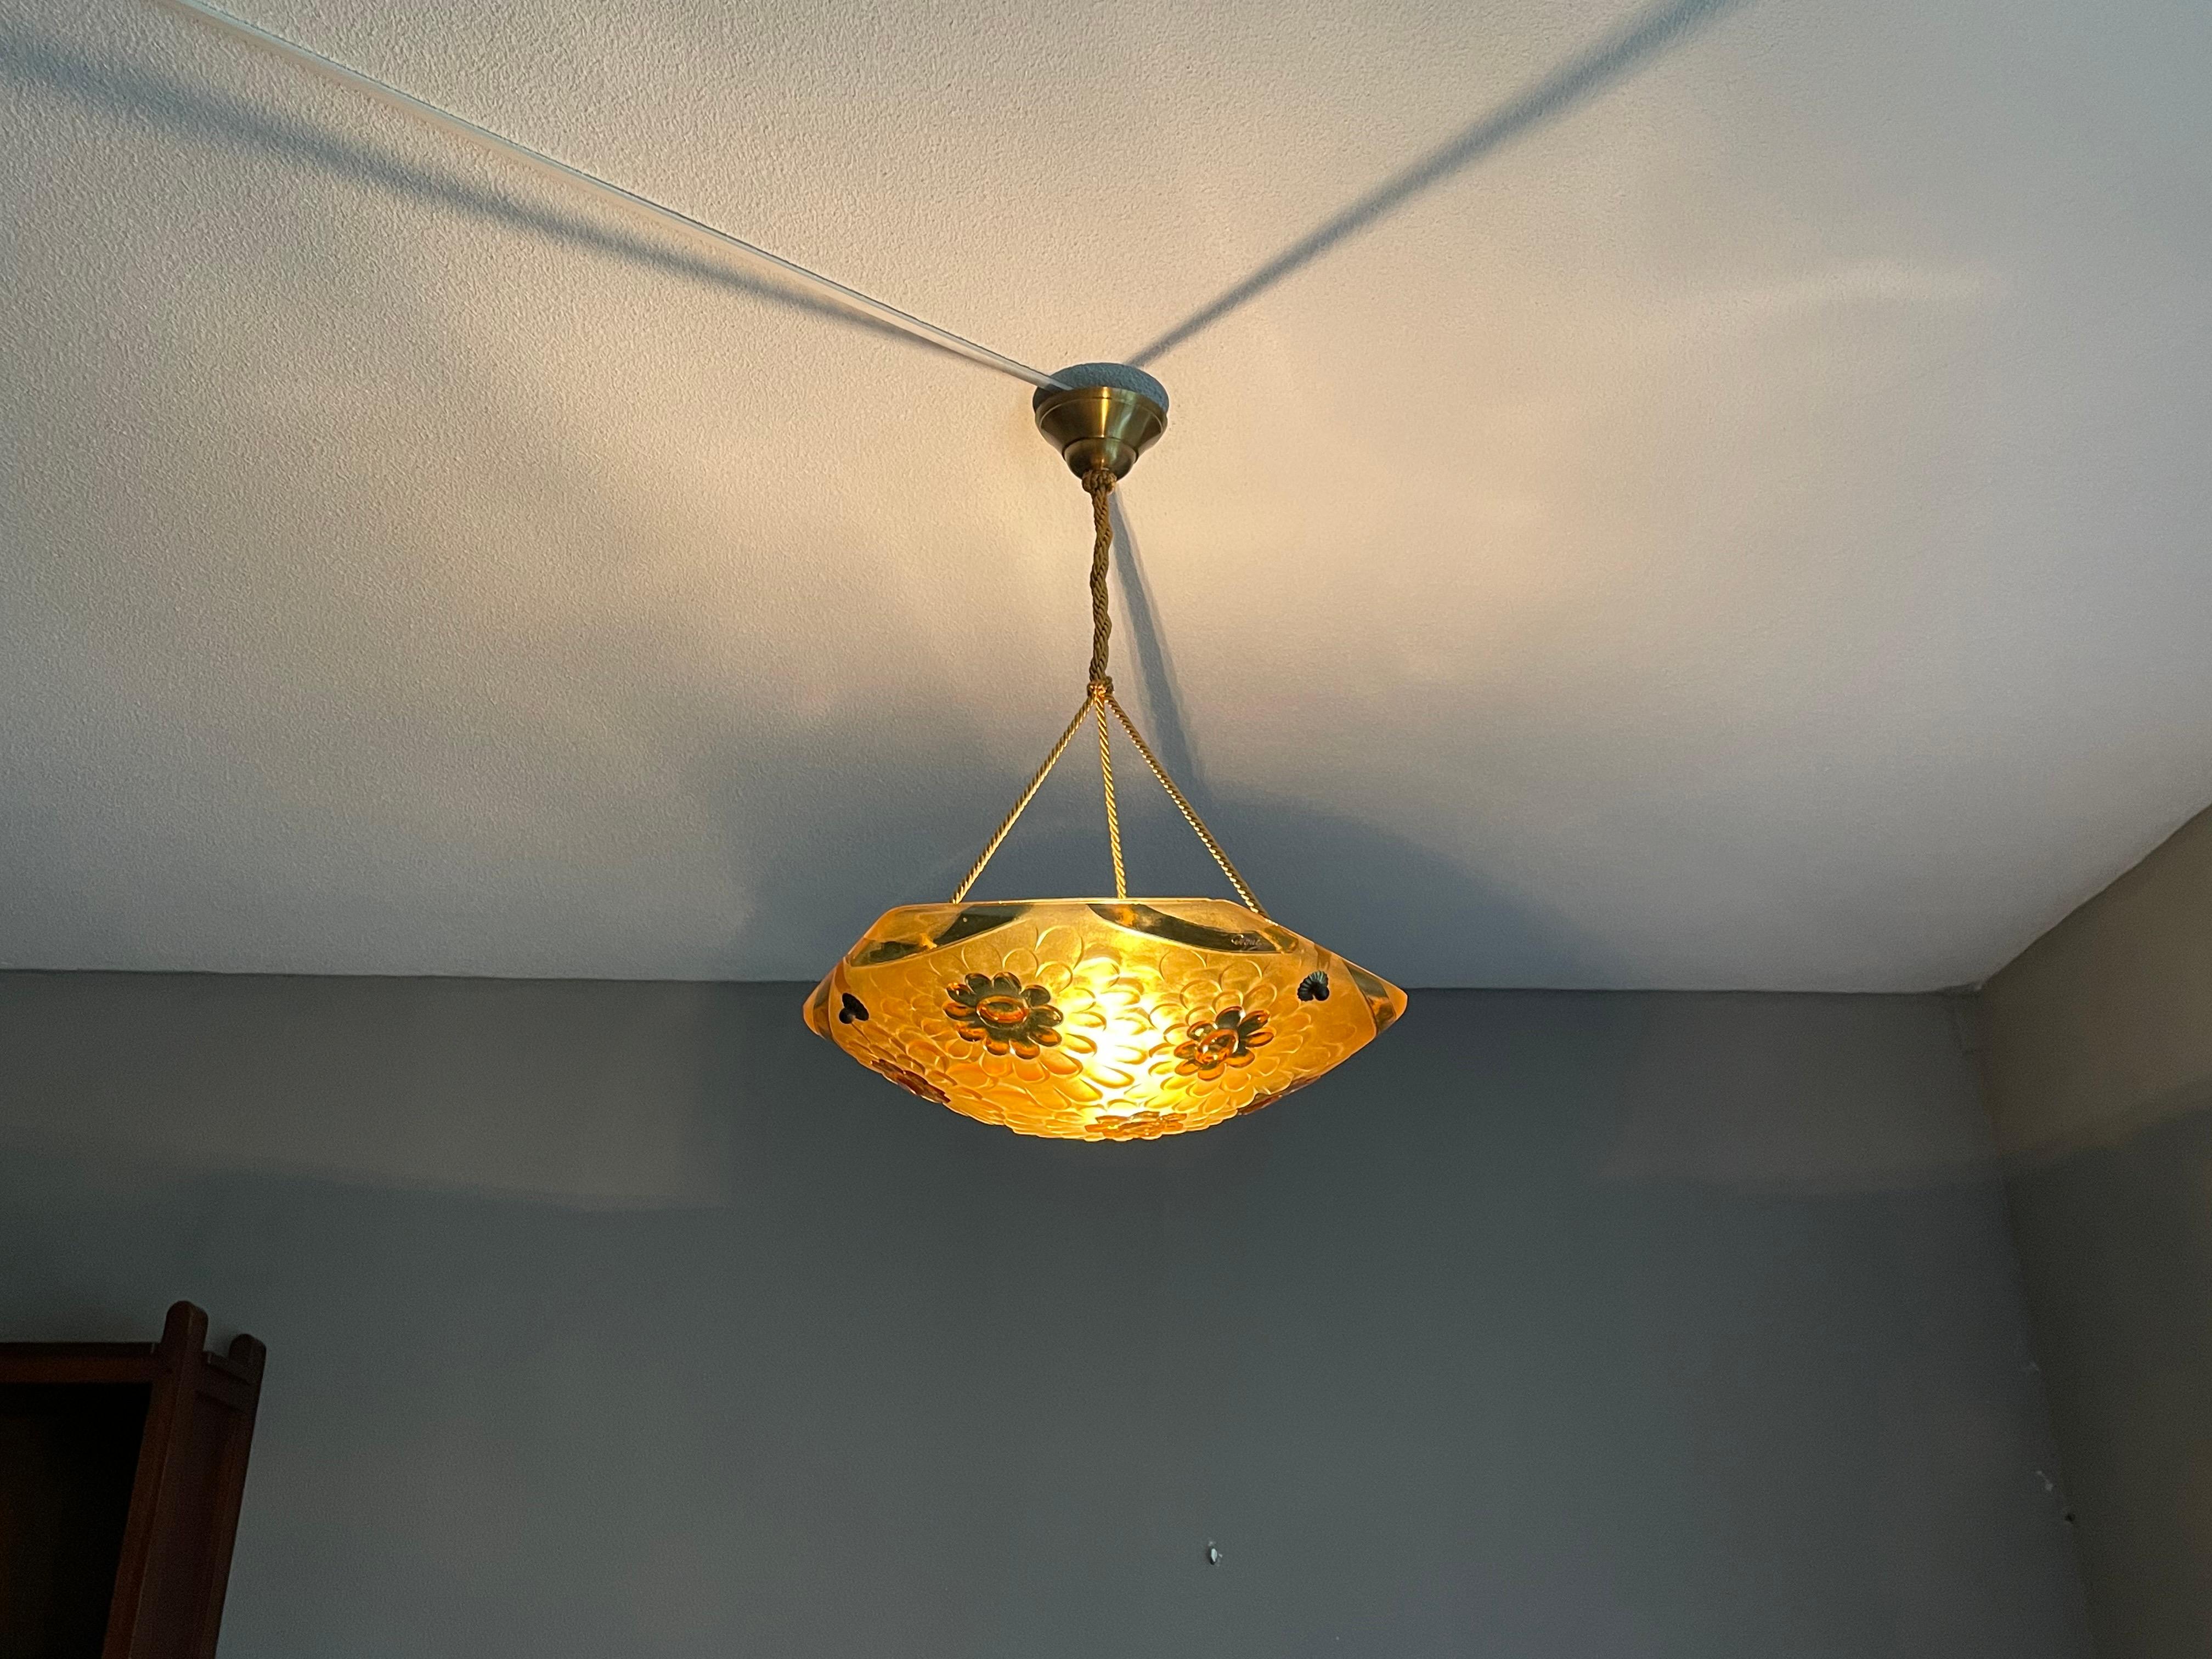 For the collectors of top quality and stylish Art Deco pendants.

This 1920s practical size chandelier is by one of France's finest when it comes to Art Deco light fixtures. For the well-to-do, Degue was one of the brands to choose, because his